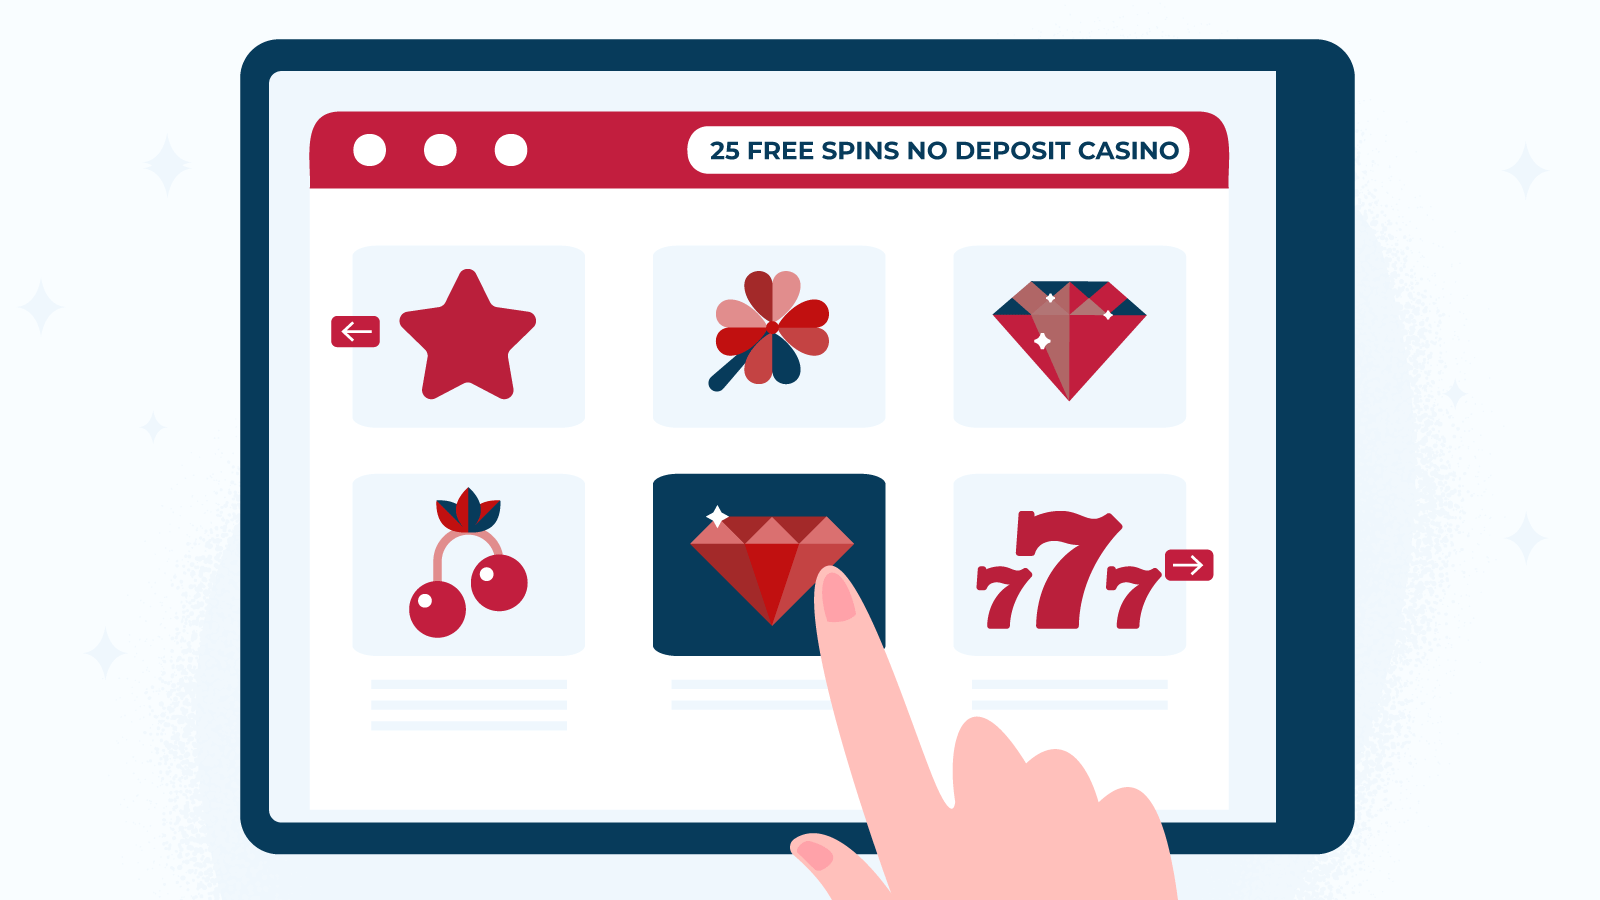 How to Choose a 25 Free Spins No Deposit Casino